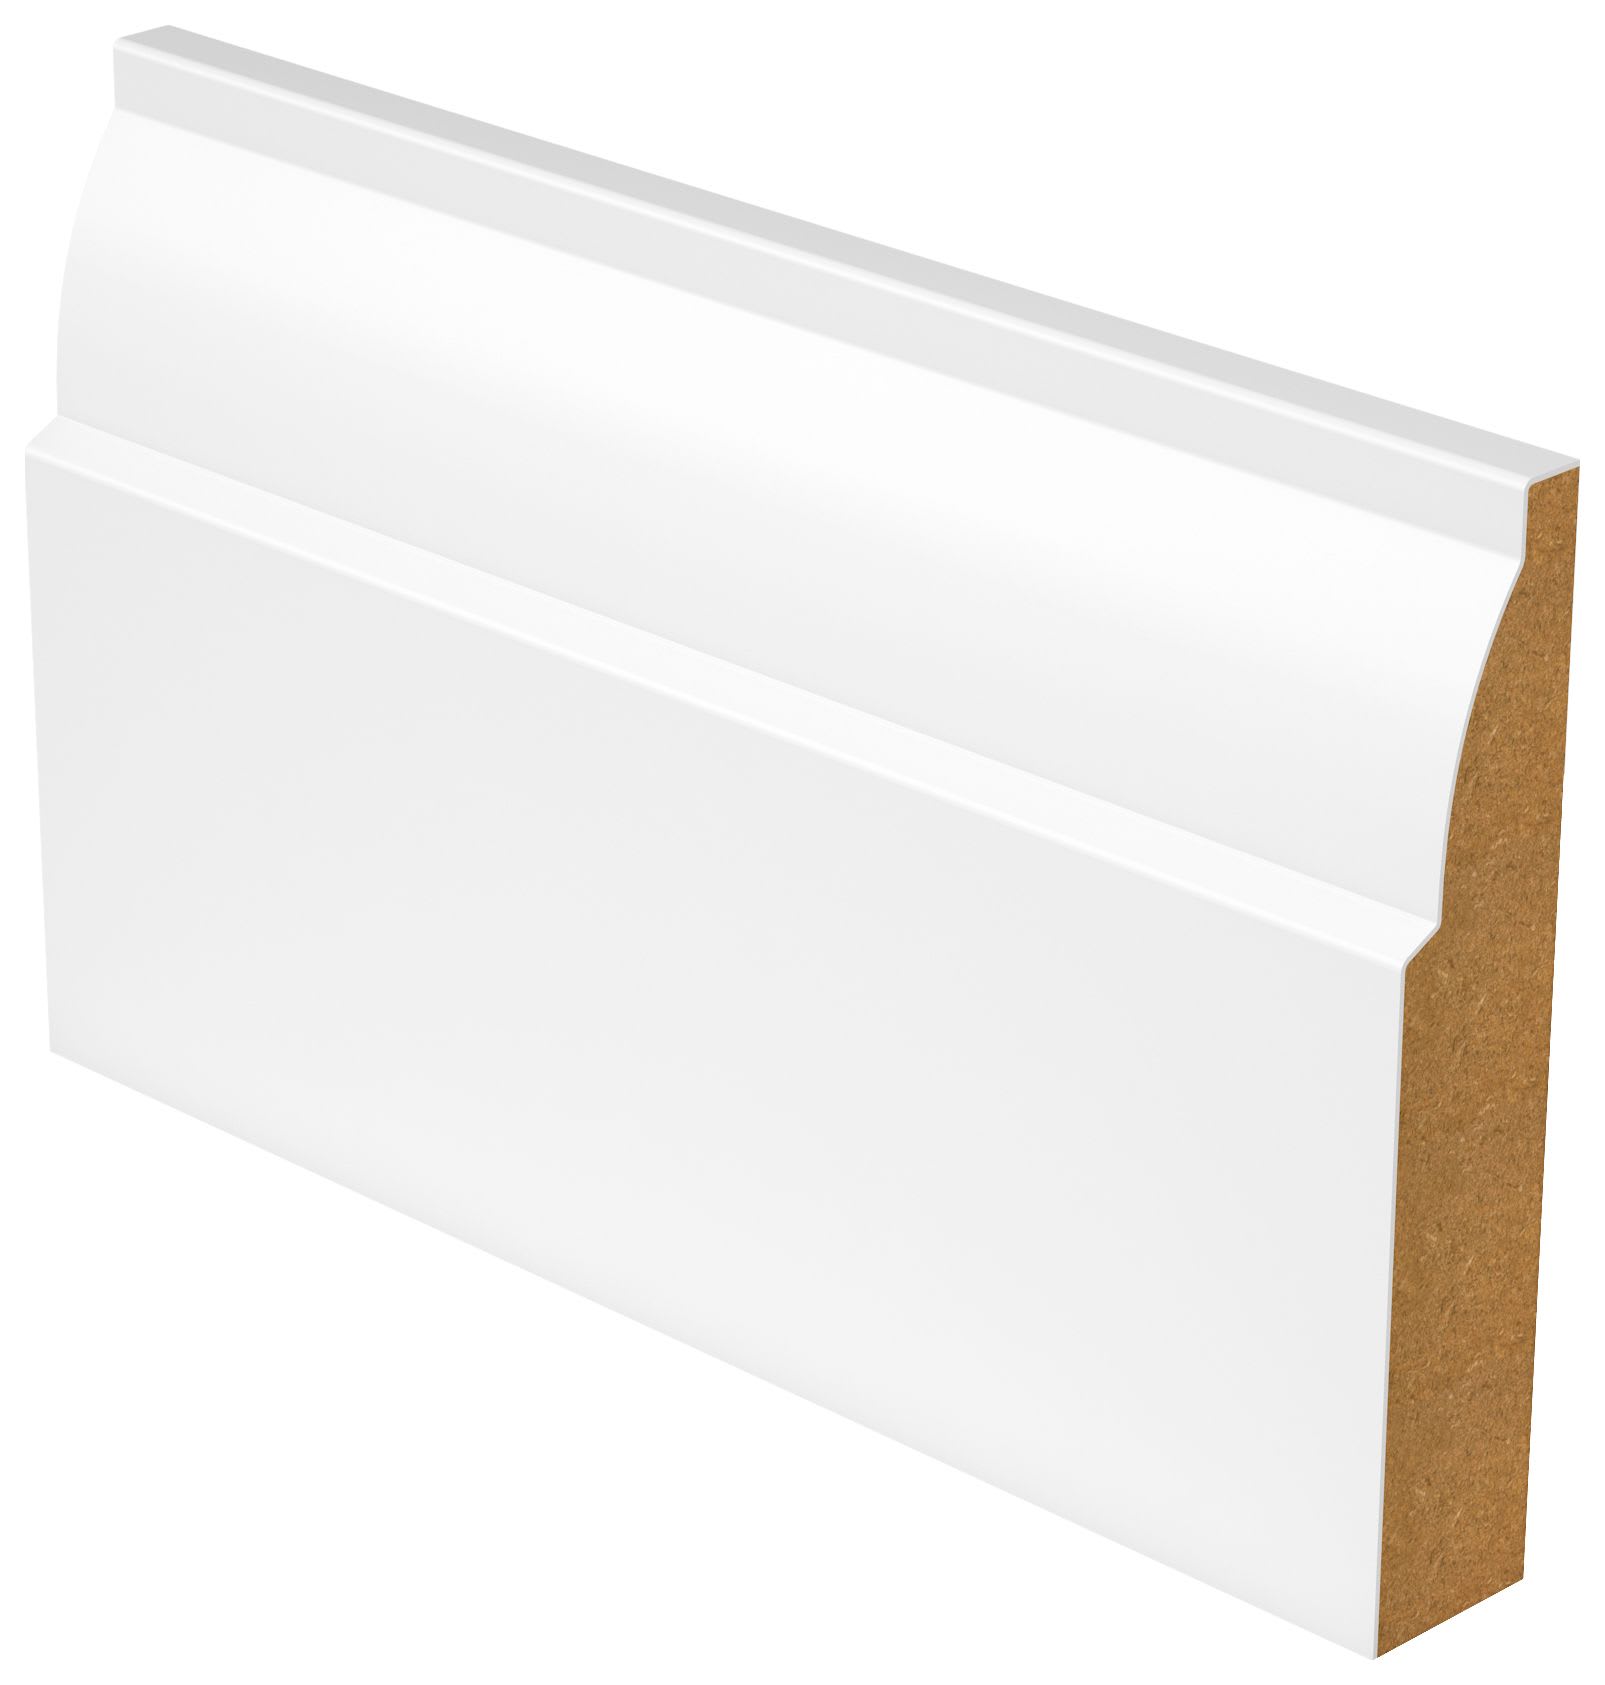 Ovolo White MDF Skirting - 18mm x 169mm